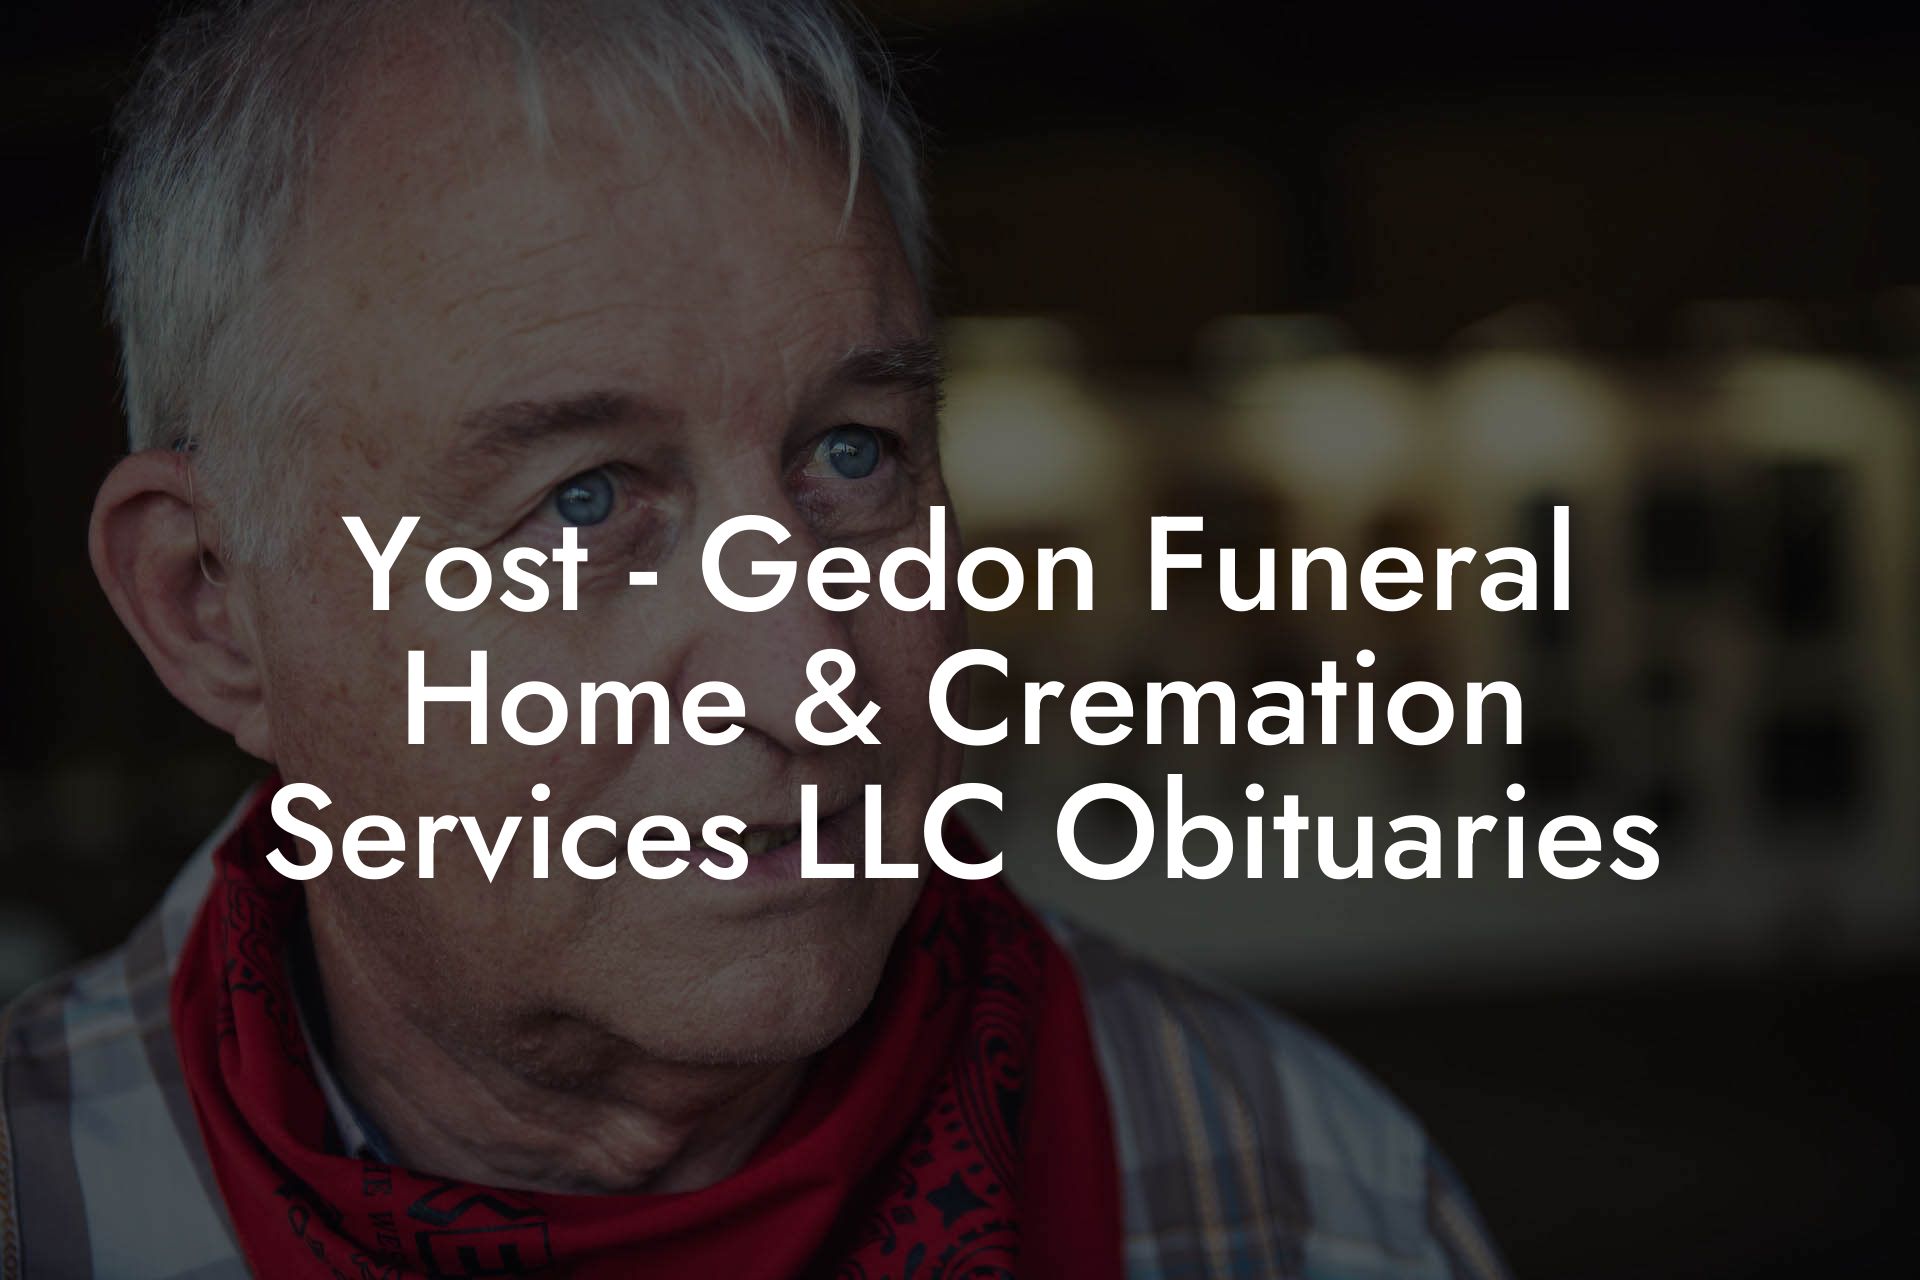 Yost - Gedon Funeral Home & Cremation Services LLC Obituaries